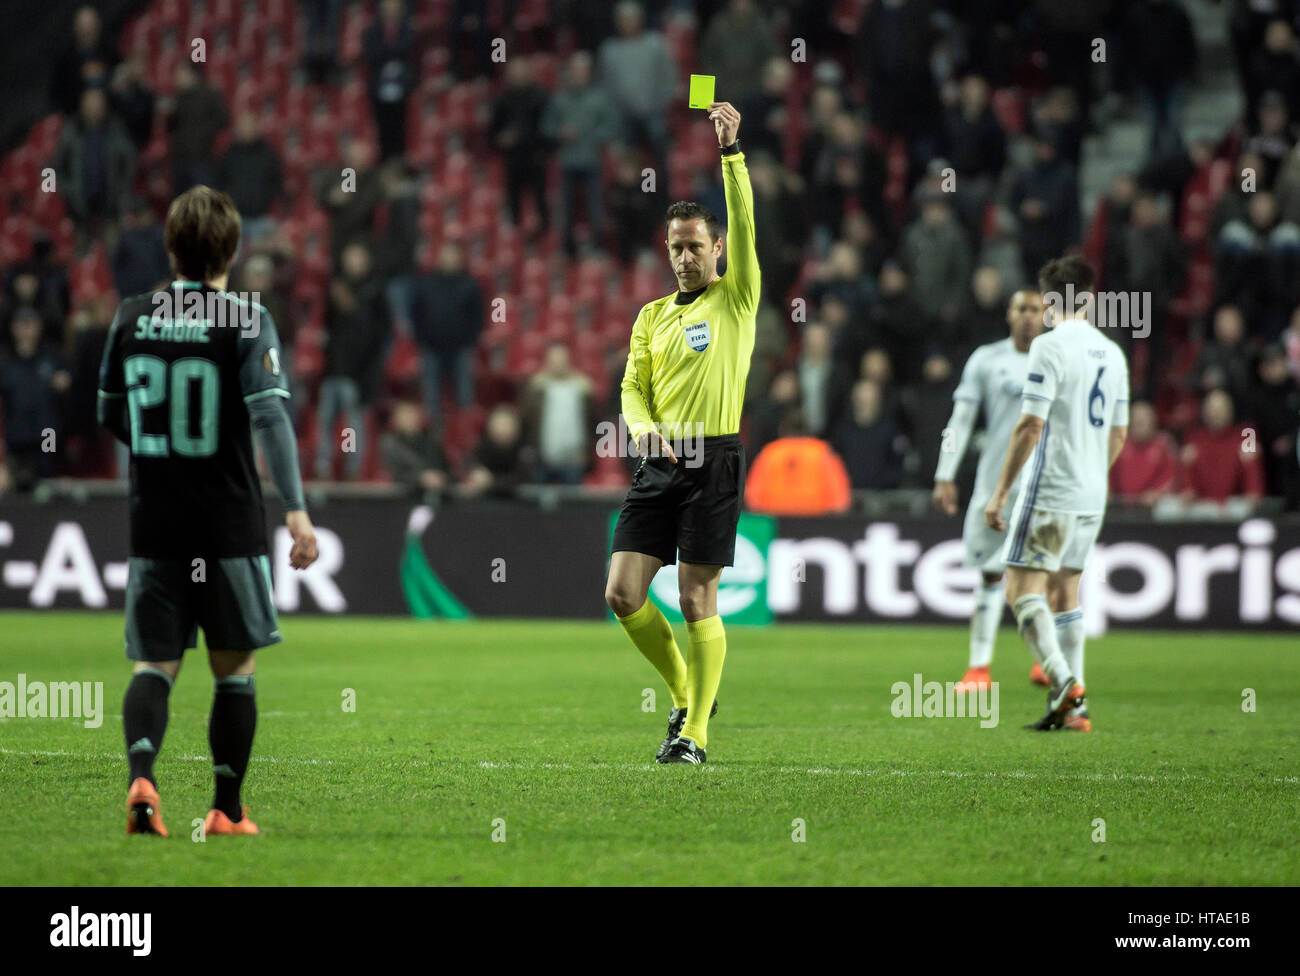 Denmark, Copenhagen, March 9th 2017. Portuguese referee Artur Soares hands out a yellow card to Ajax's Lasse Schøne (20) during the Europa League round of 16 match between FC Copenhagen and Ajax Amsterdam at Telia Parken. Stock Photo